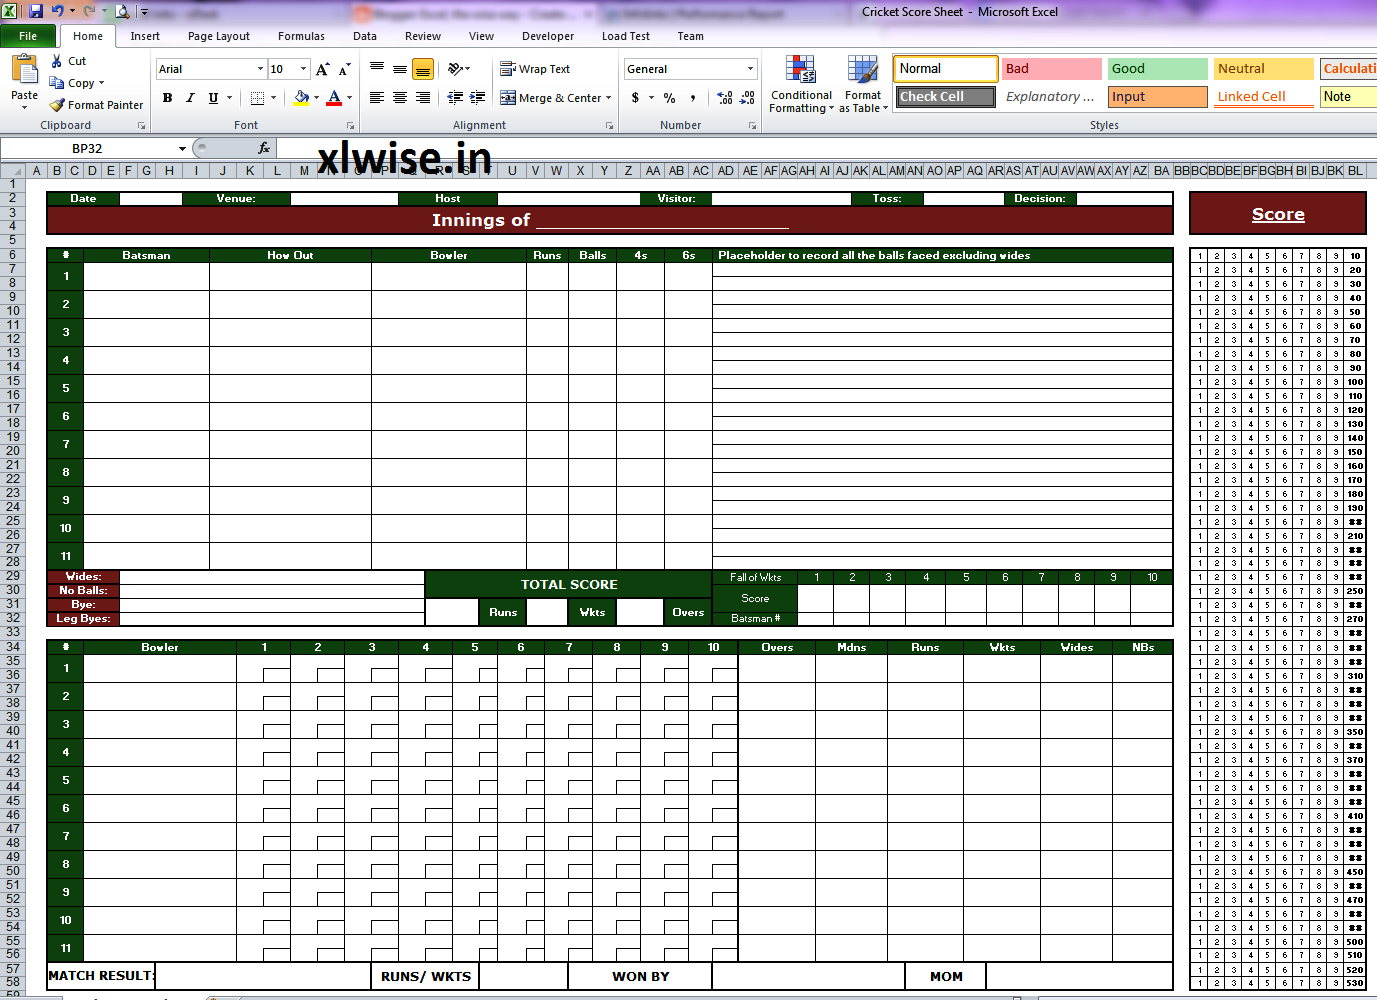 cricket-score-sheet-50-overs-excel-the-wise-way